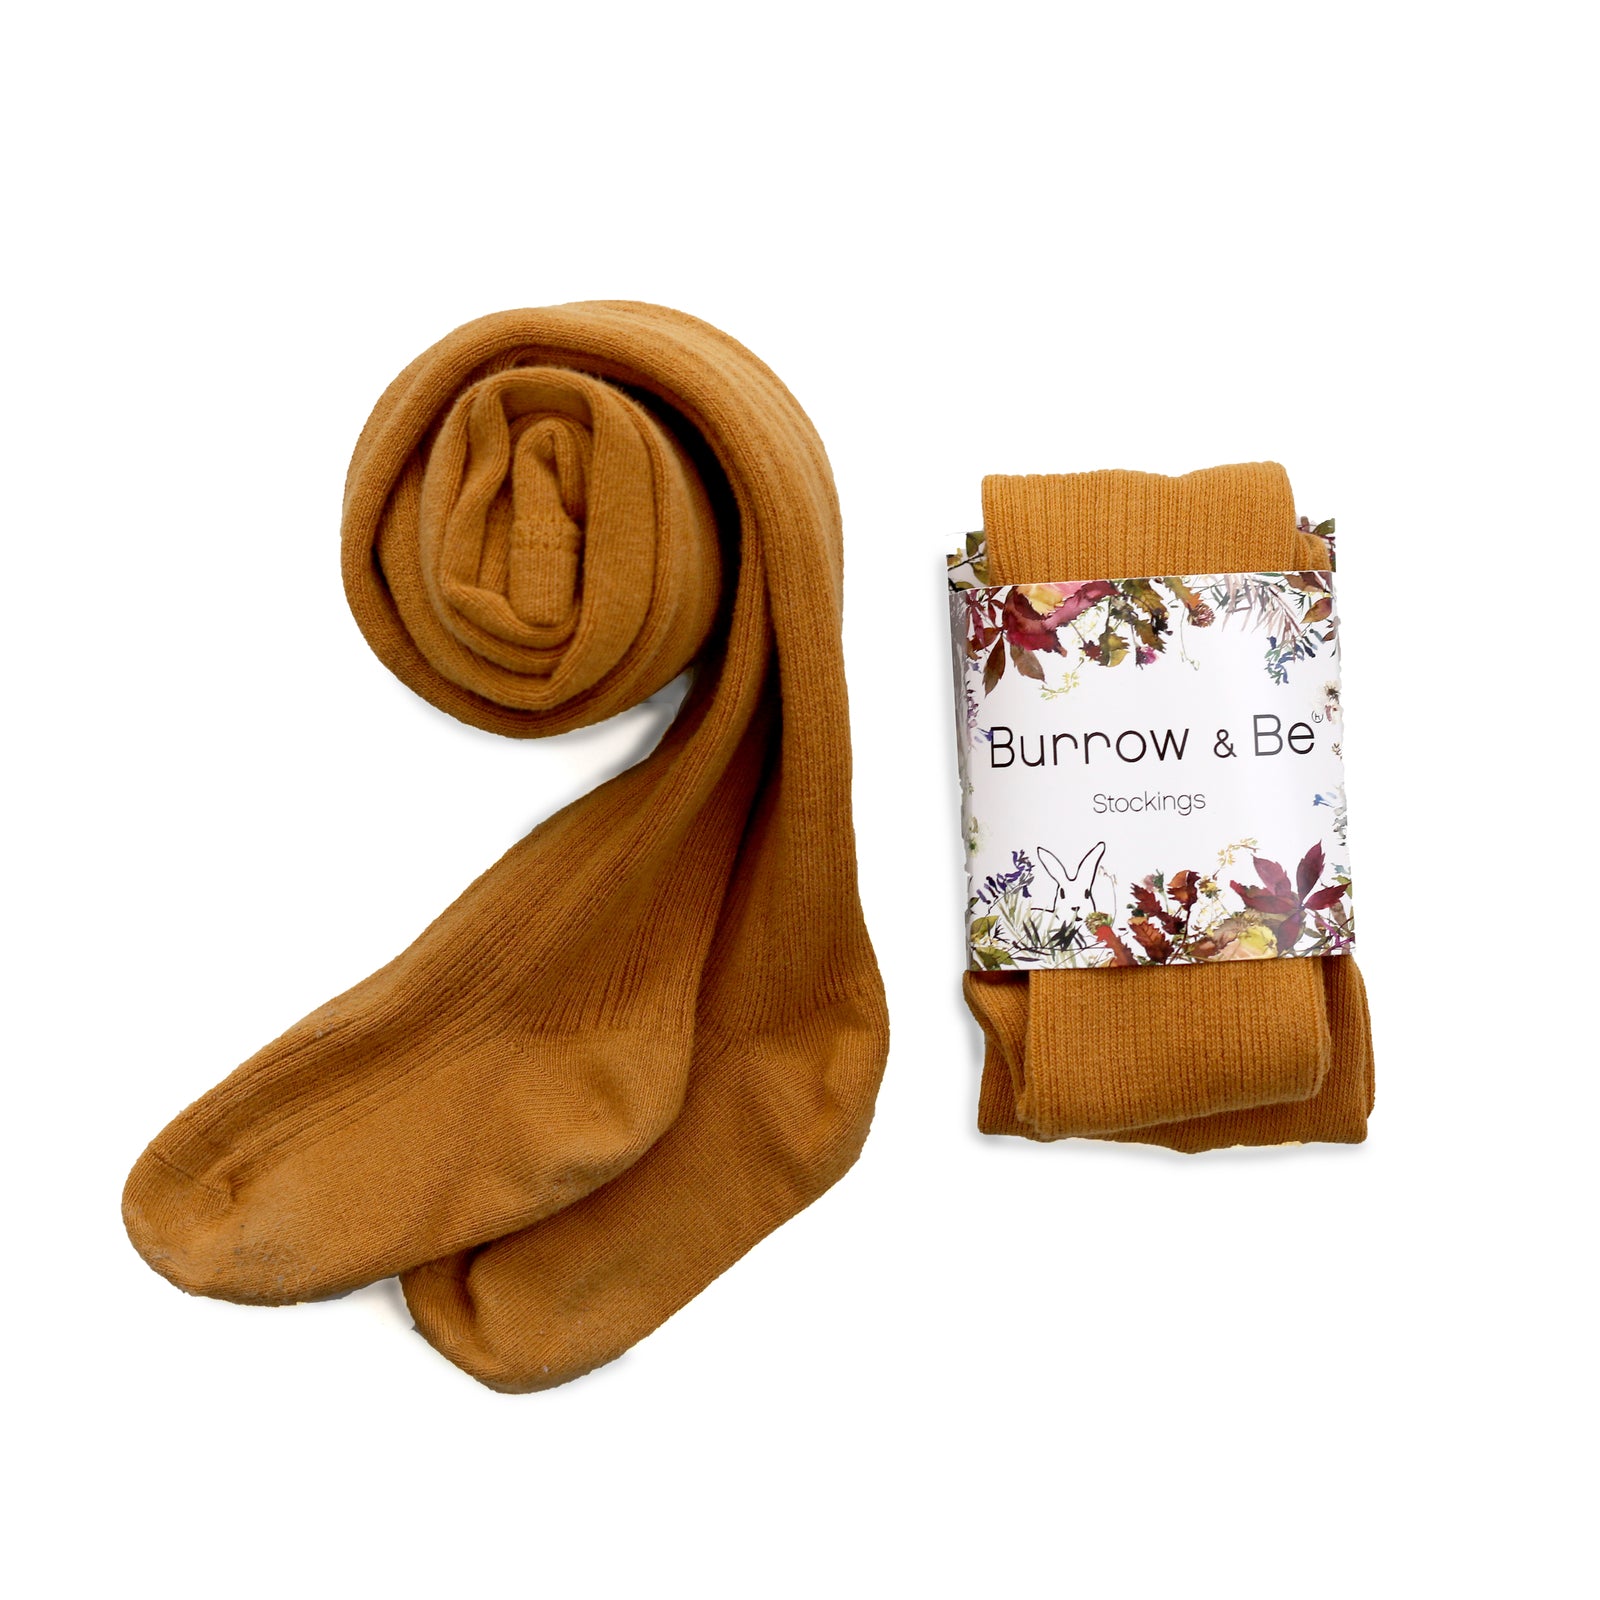 Burrow & Be | Footed Stocking - Found My Way Invercargill